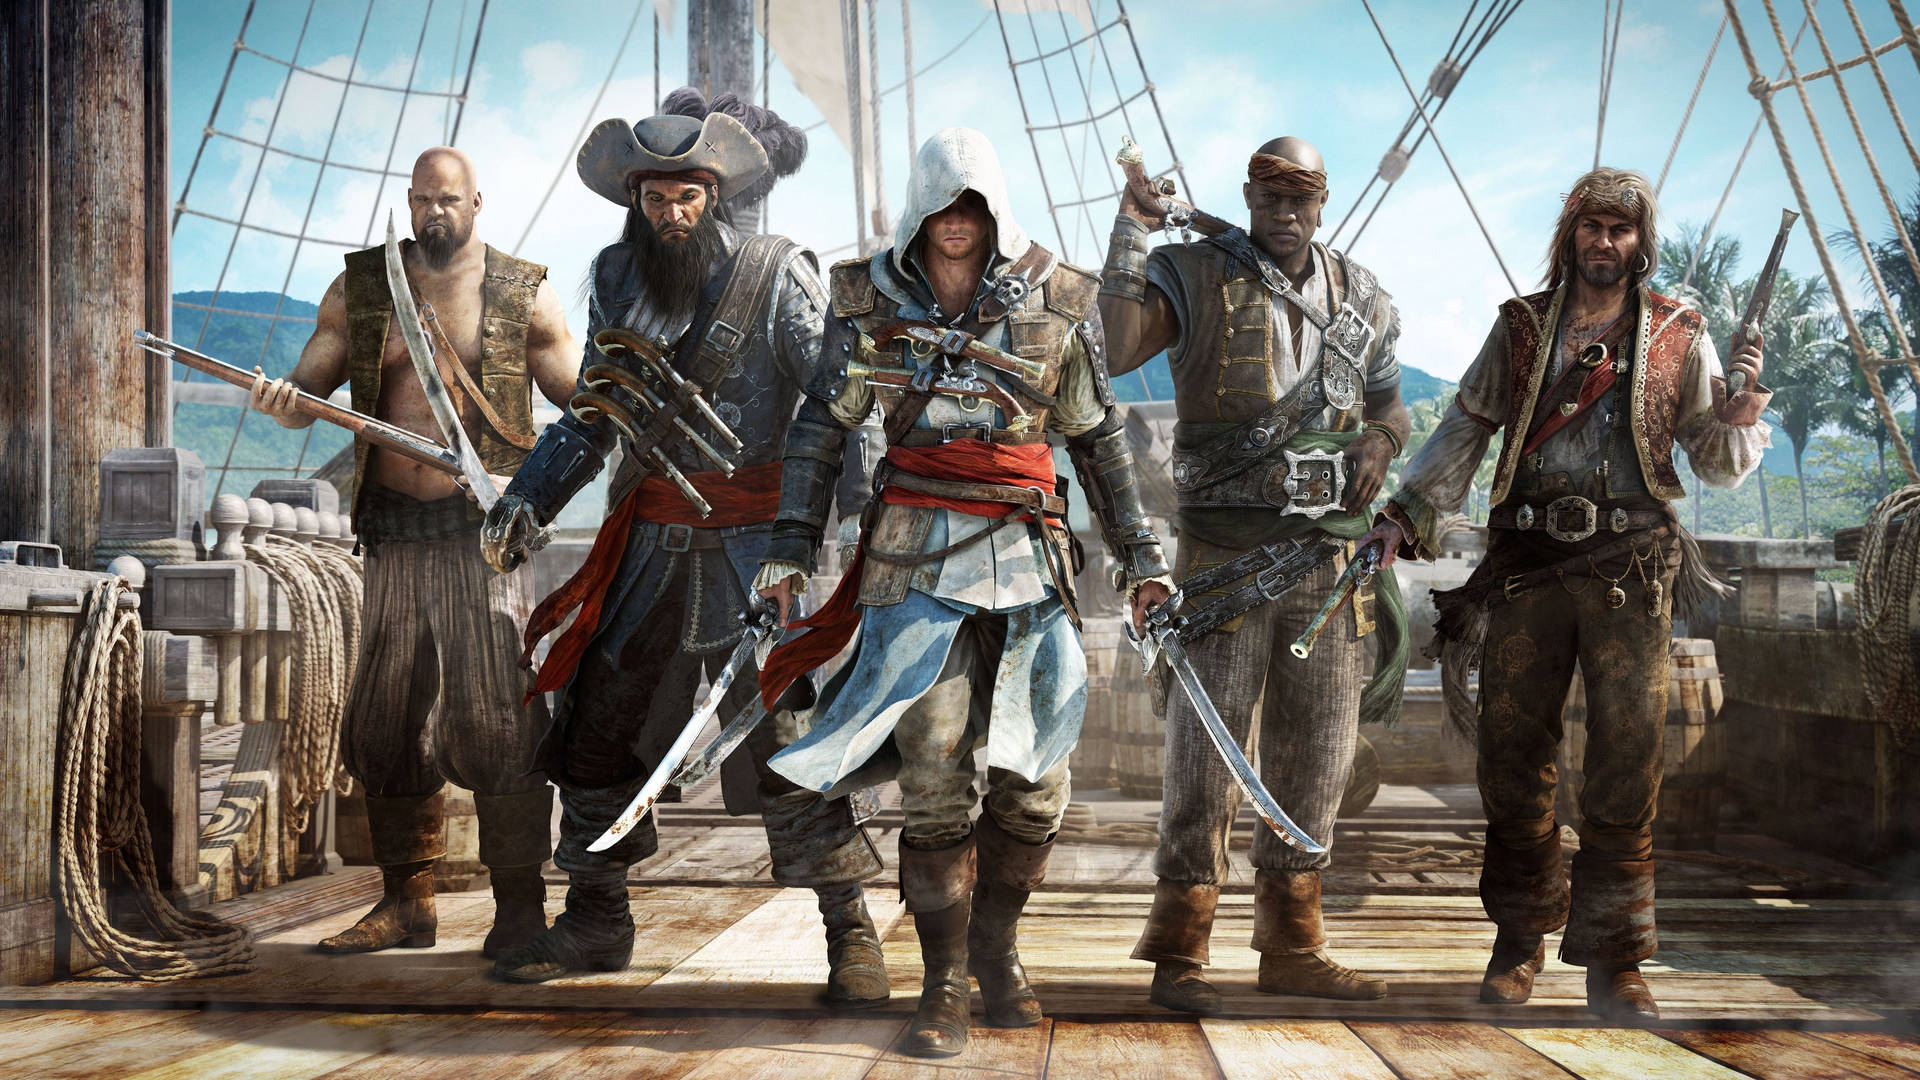 4k Pirate Crew From Assassin’s Creed Wallpaper